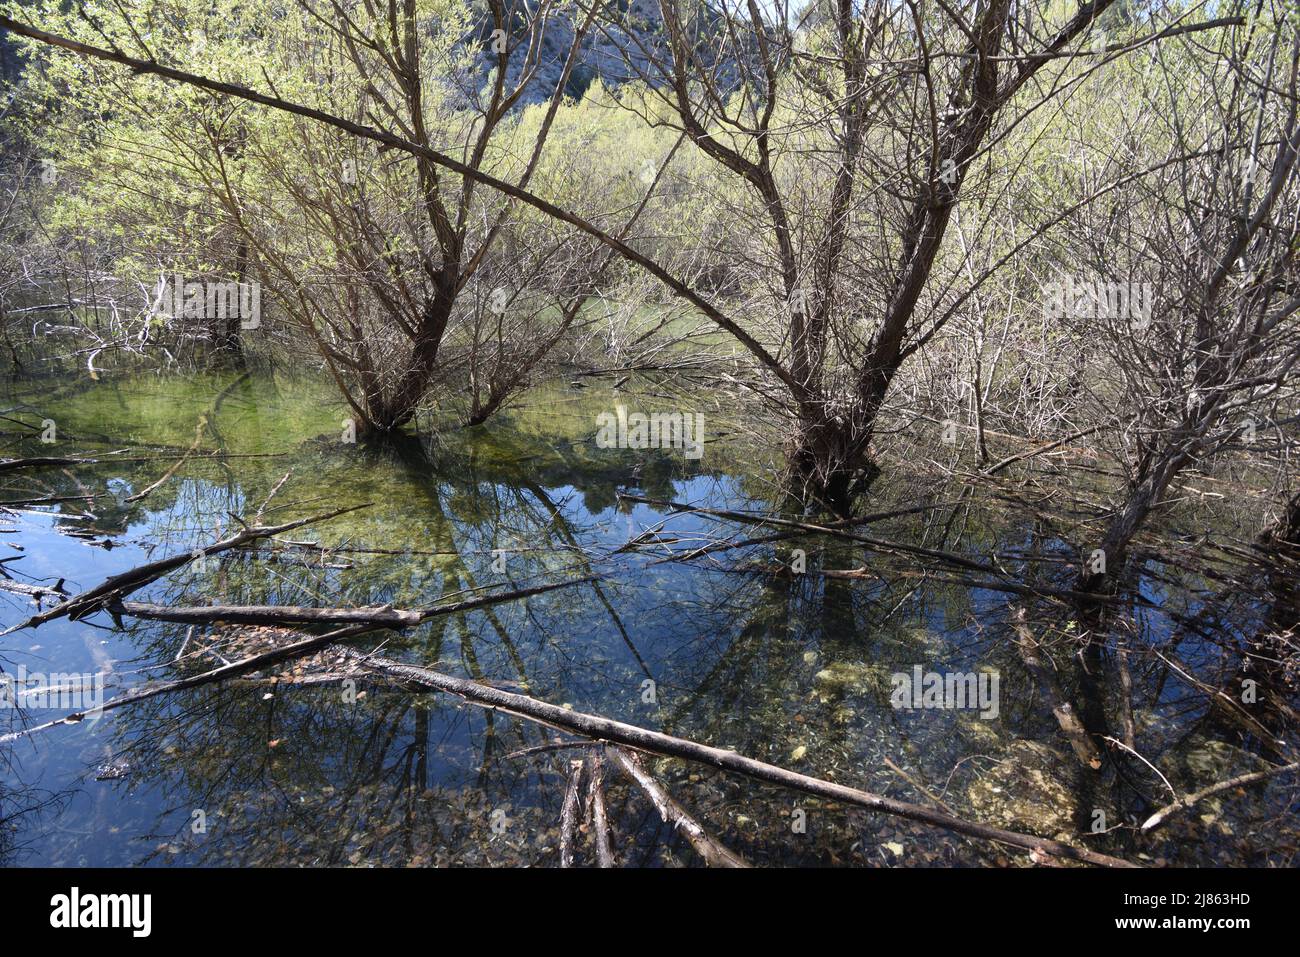 Wetland Vegetation & Flooded Willow Trees on Cause River Lake Zola in the Montagne Sainte-Victoire Nature Reserve Aix-en-Provence Provence France Stock Photo